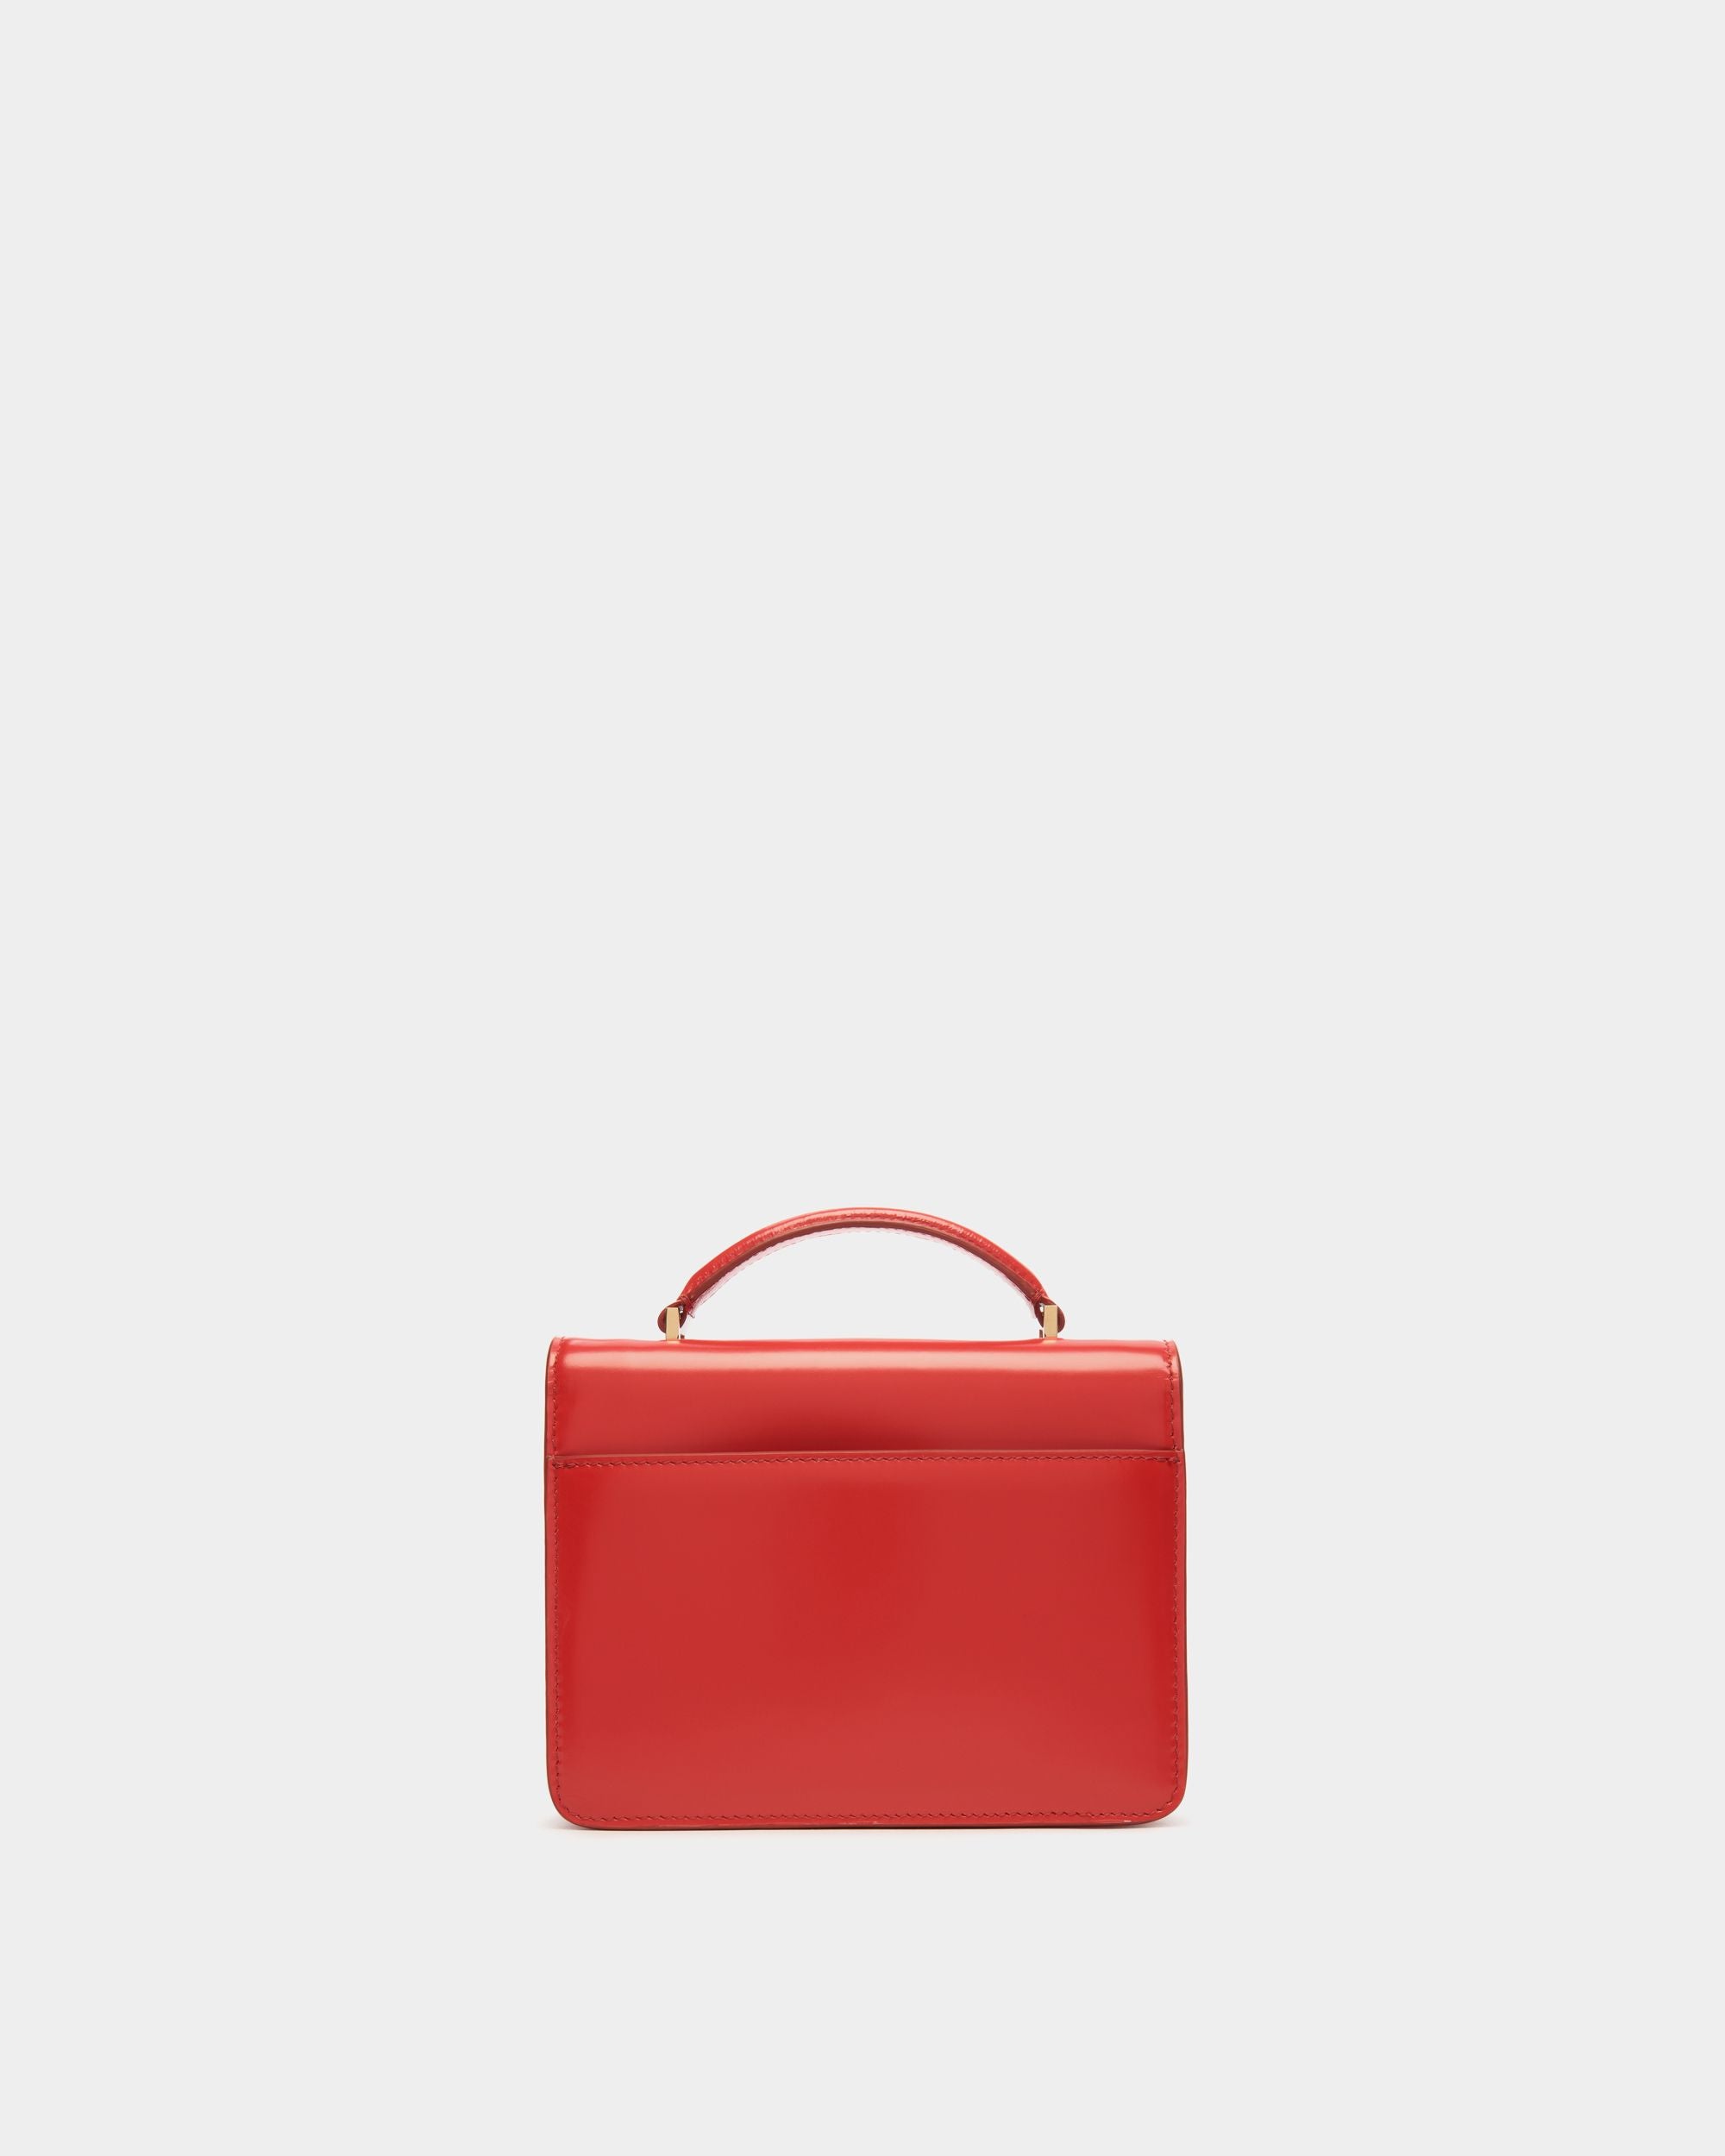 Women's Ollam Mini Top Handle Bag in Candy Red Brushed Leather | Bally | Still Life Back